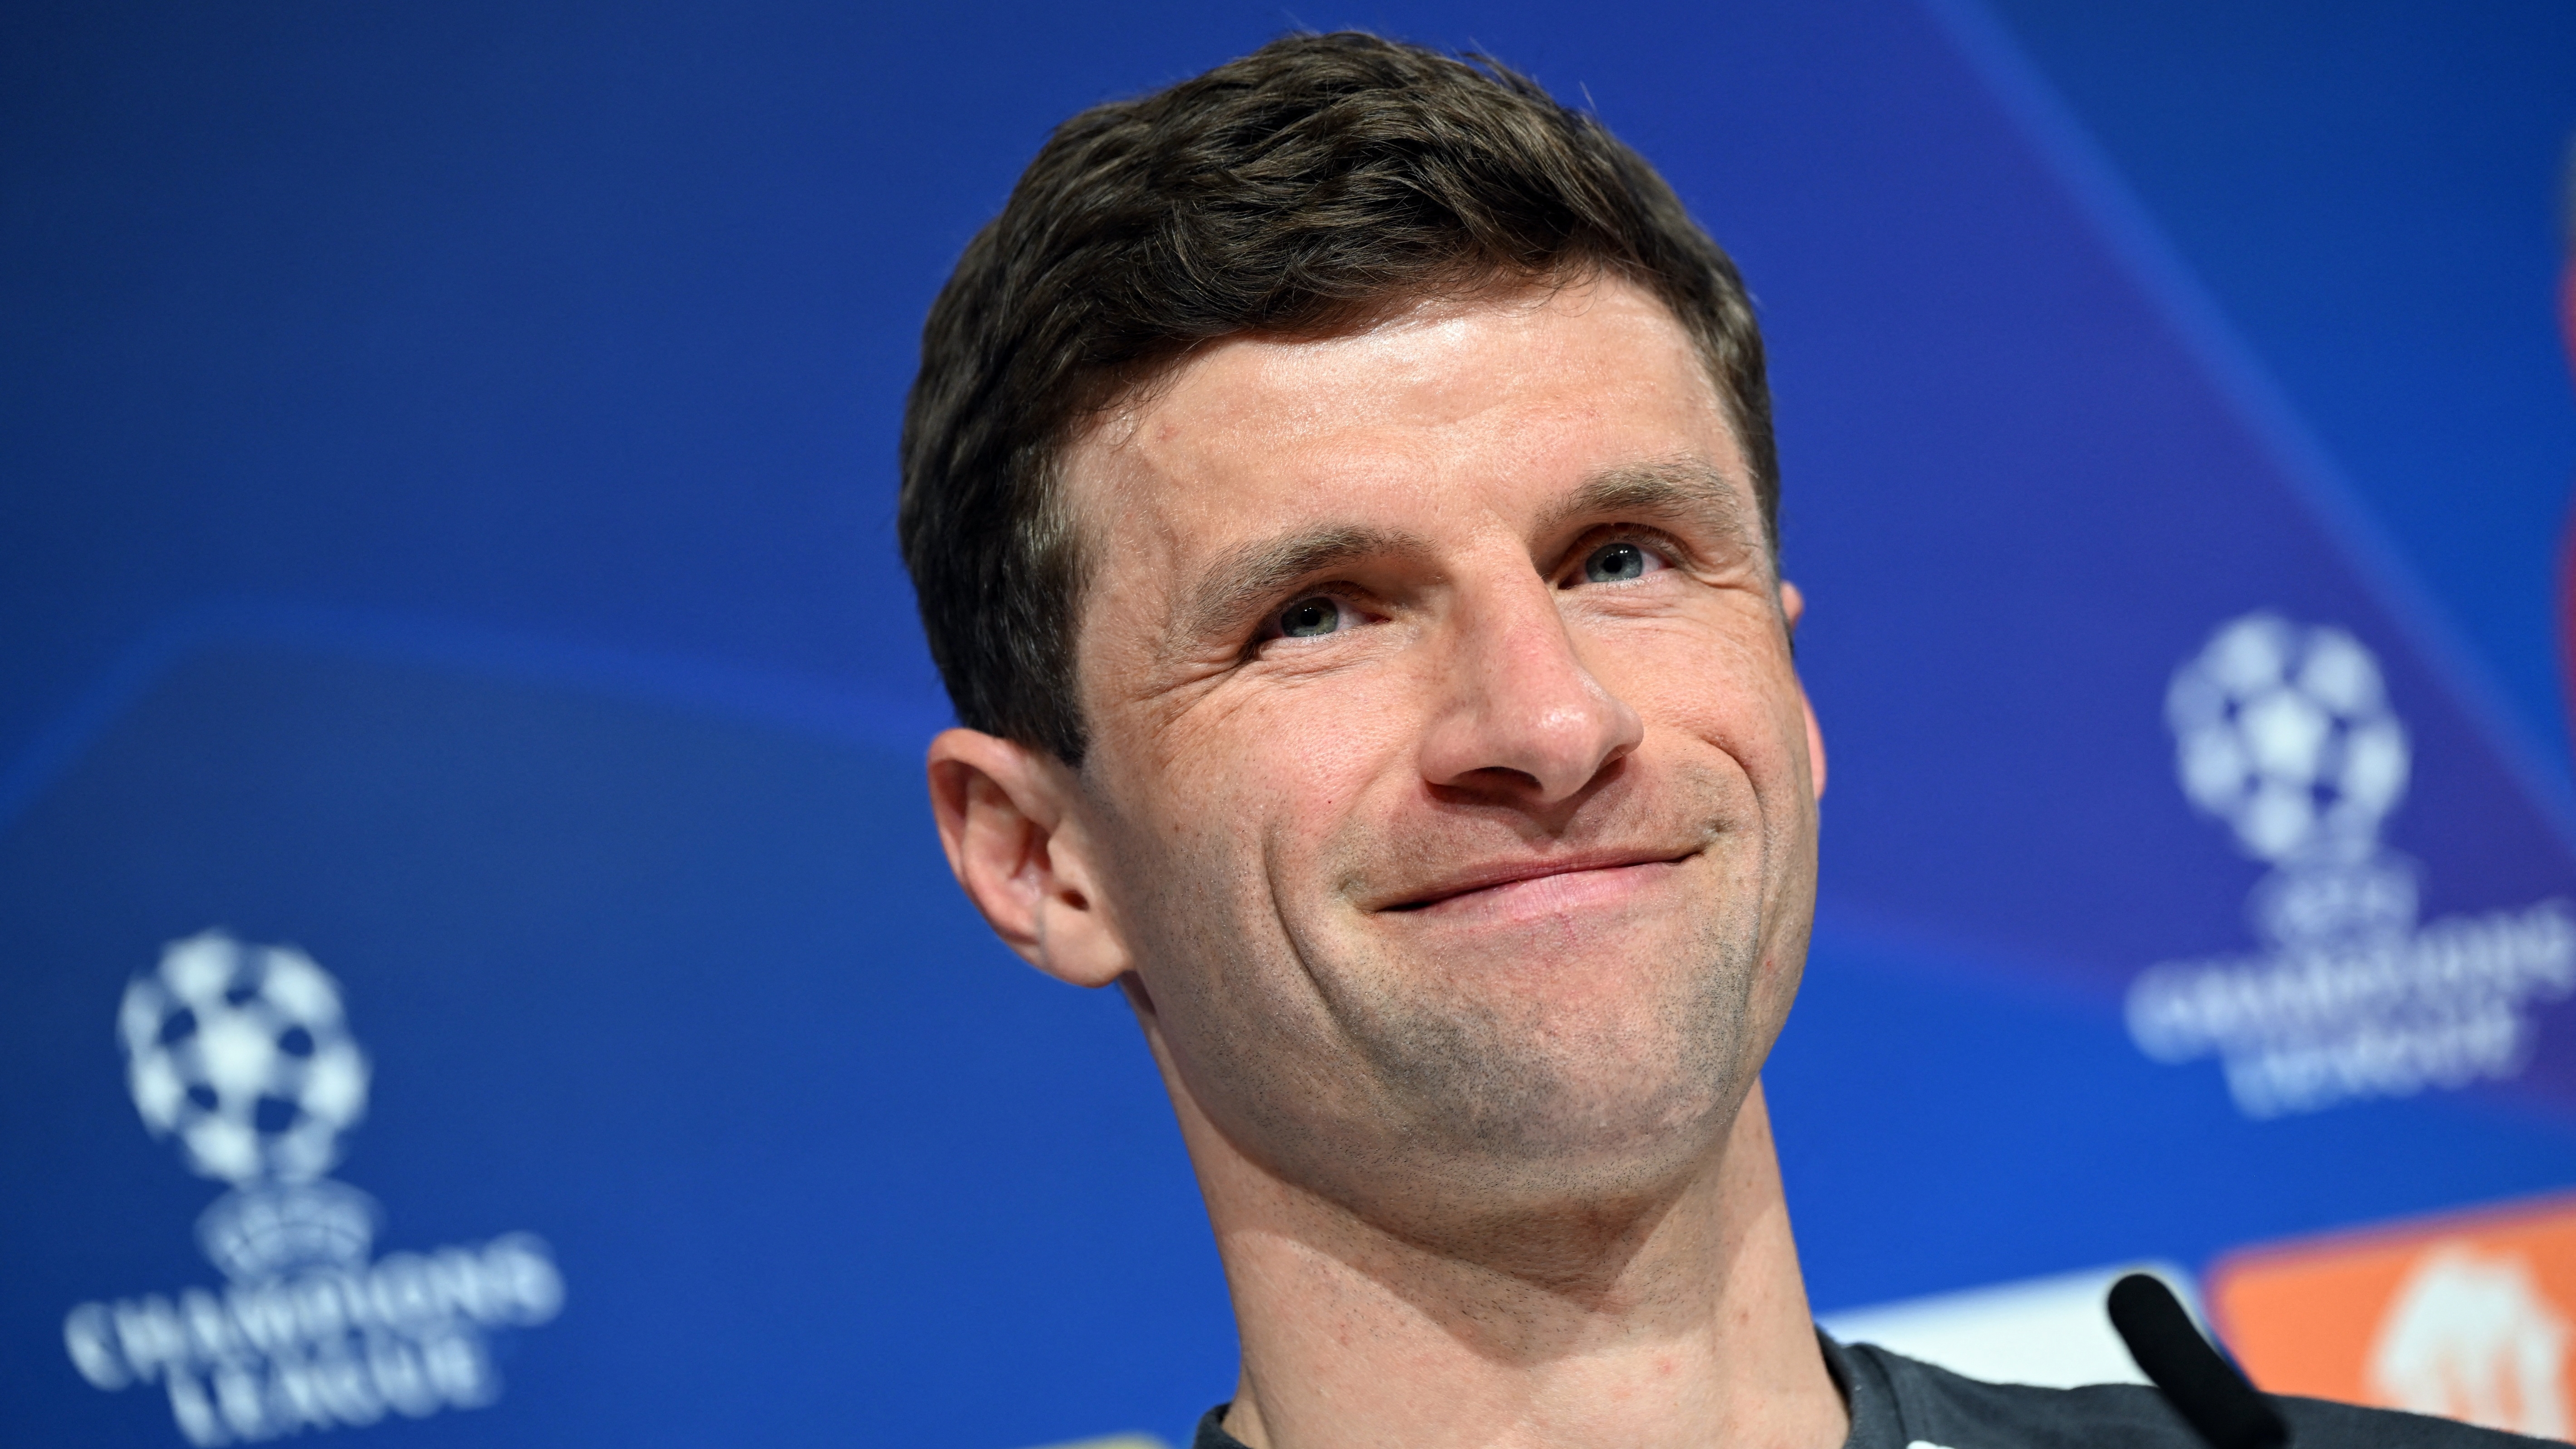 Soccer Football - Champions League - Bayern Munich Press Conference - Allianz Arena, Munich, Germany - March 7, 2023 Bayern Munich's Thomas Muller during the press conference REUTERS/Angelika Warmuth